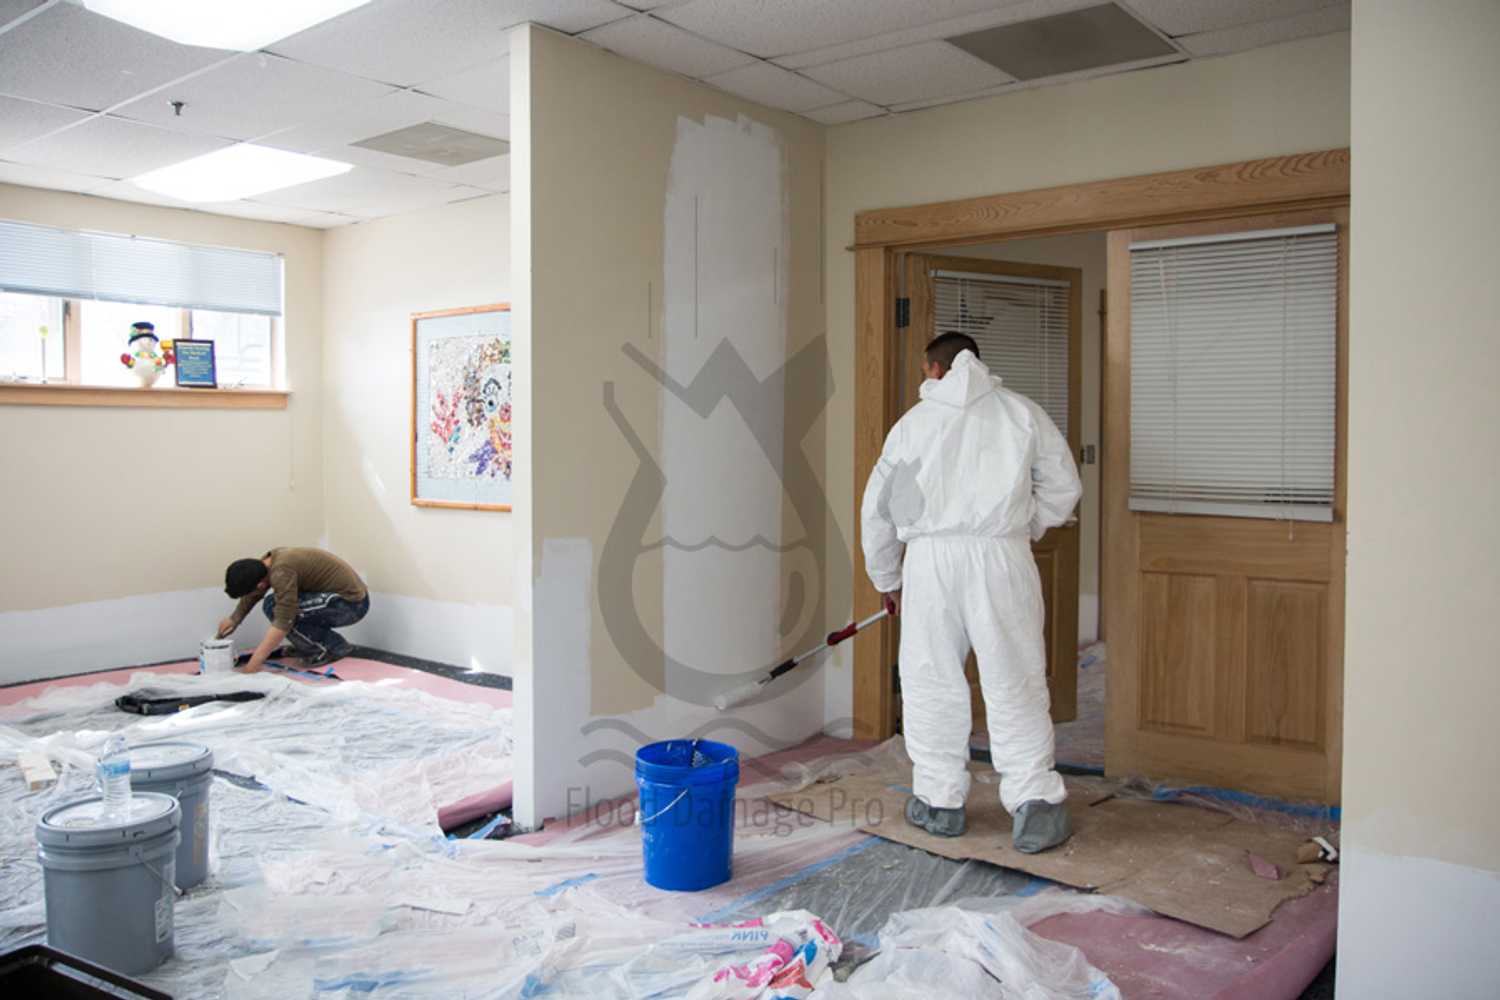 Water damage restoration at a retirement center project